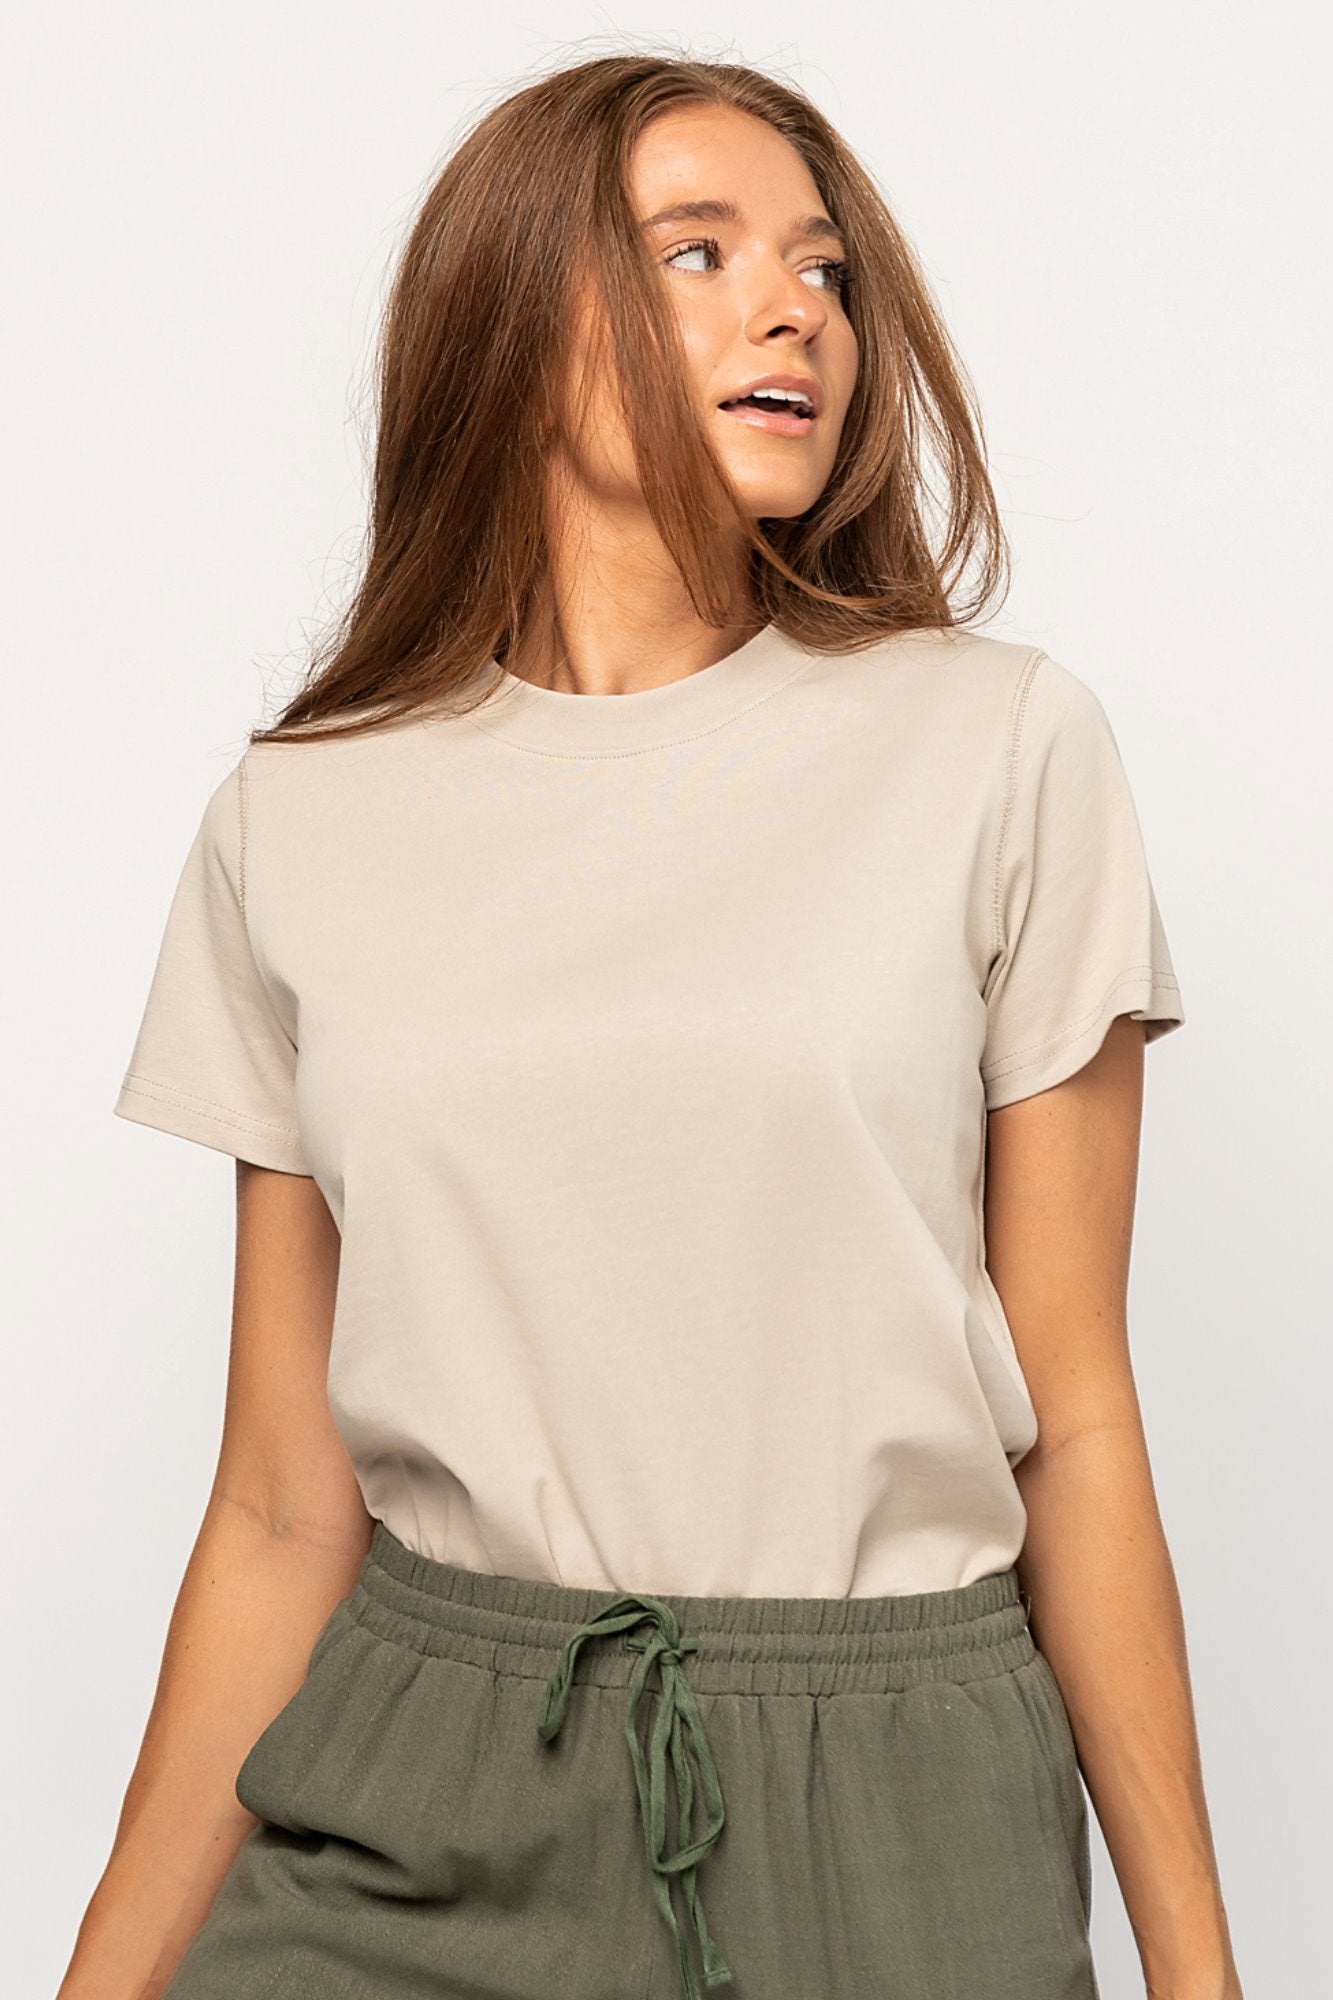 Grady Top in Stone (Small-XL) Holley Girl 